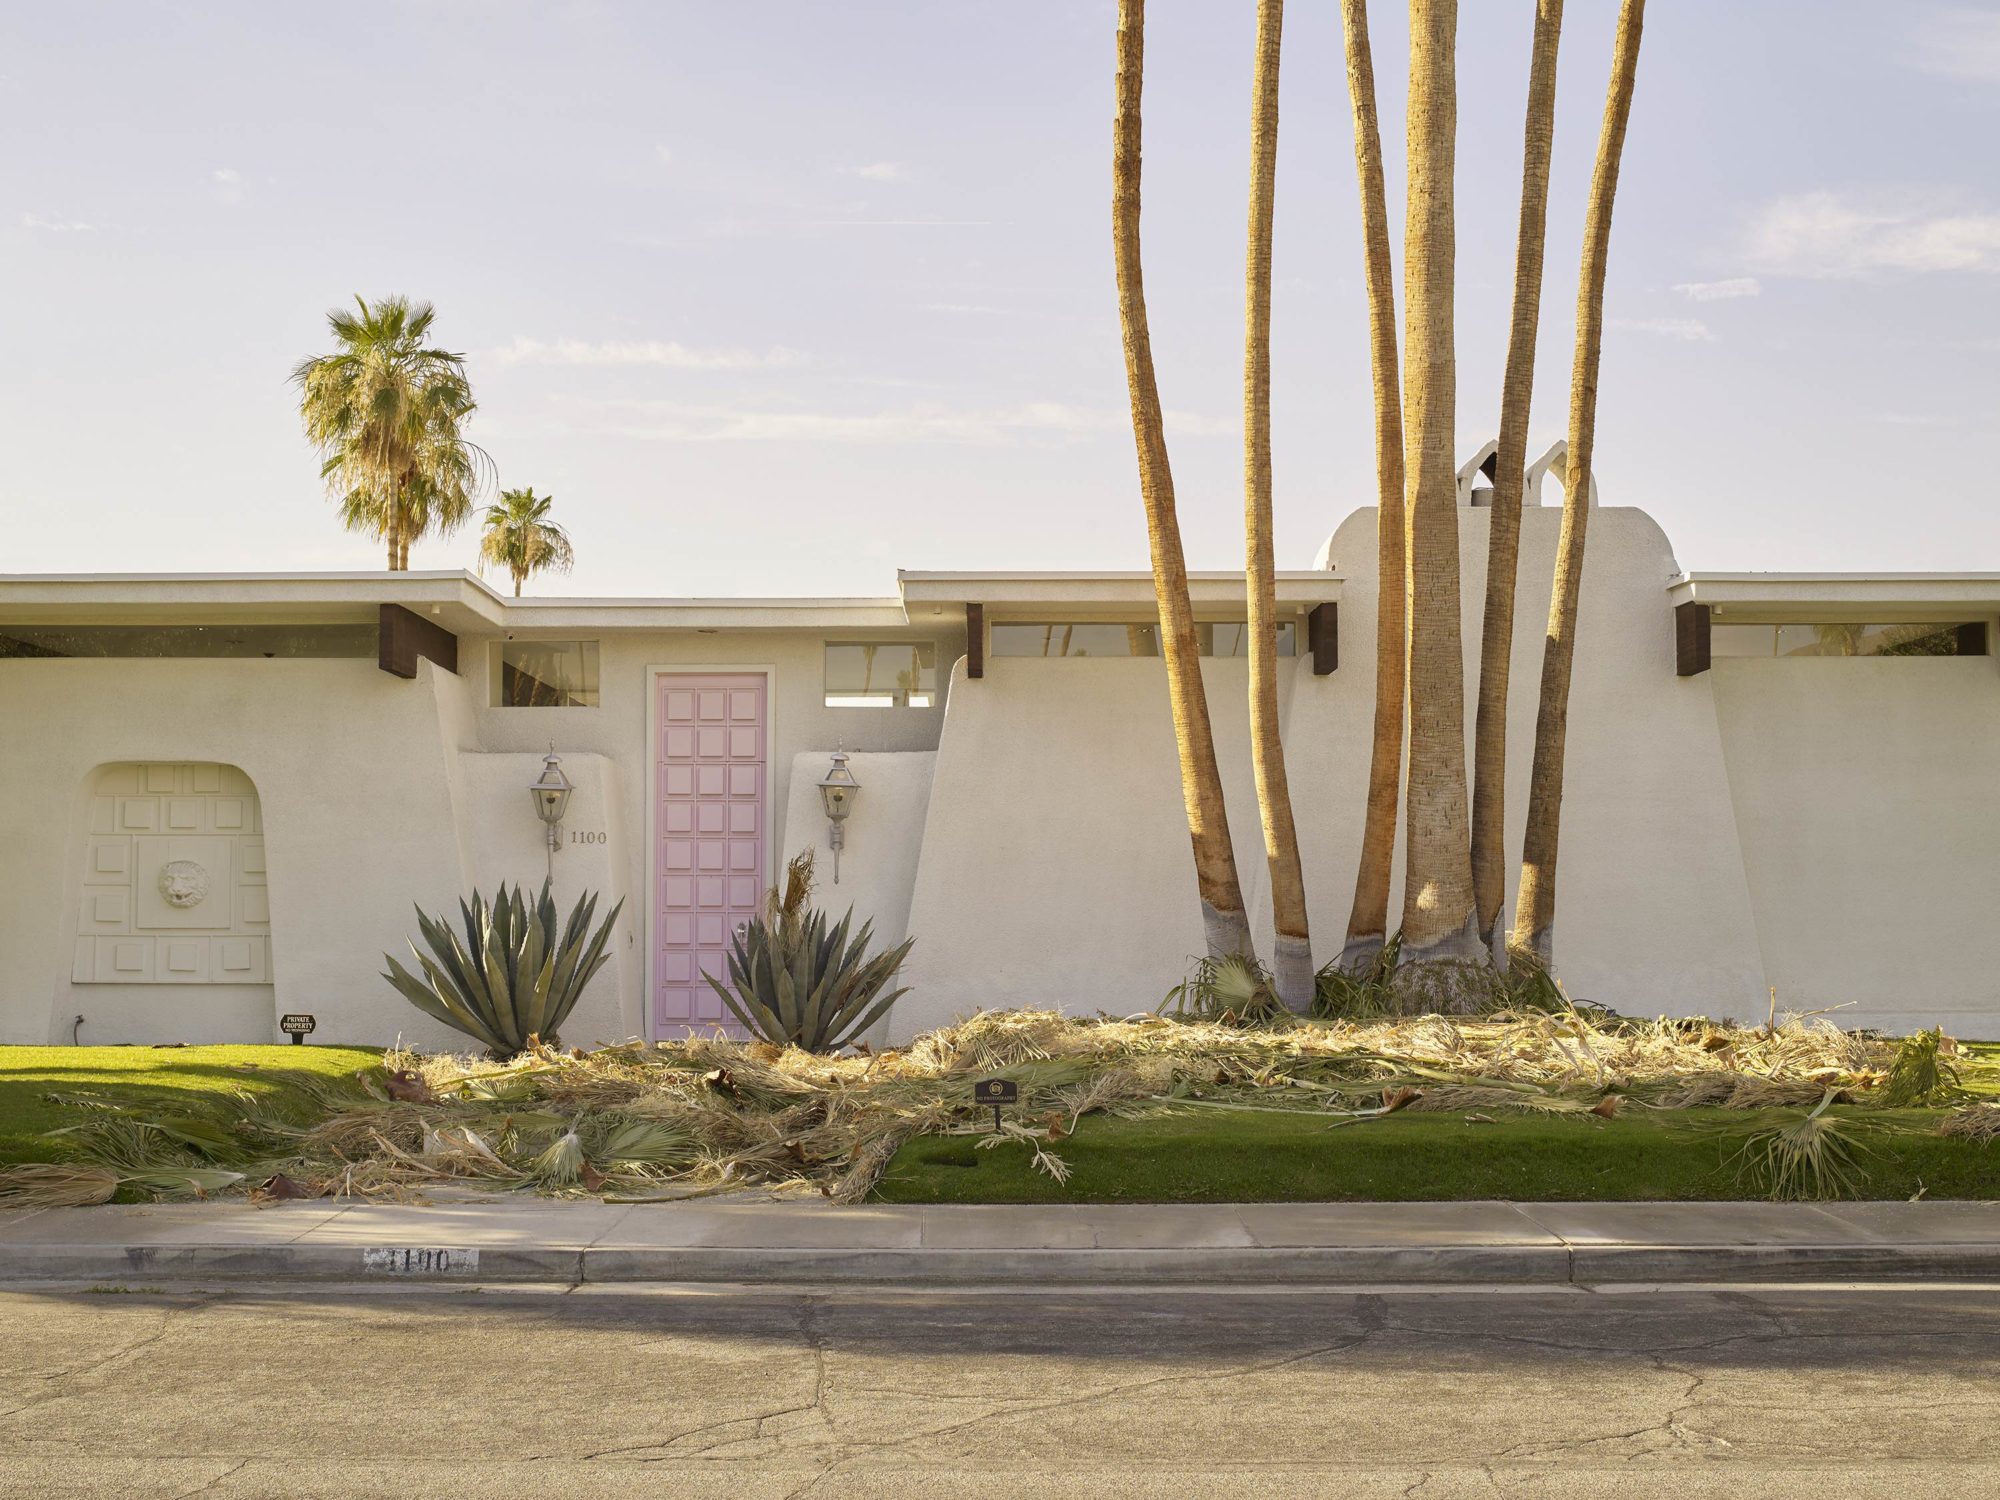 No Photography - I Heart Palm Springs Collection - Fine Art Photography by Toby Dixon